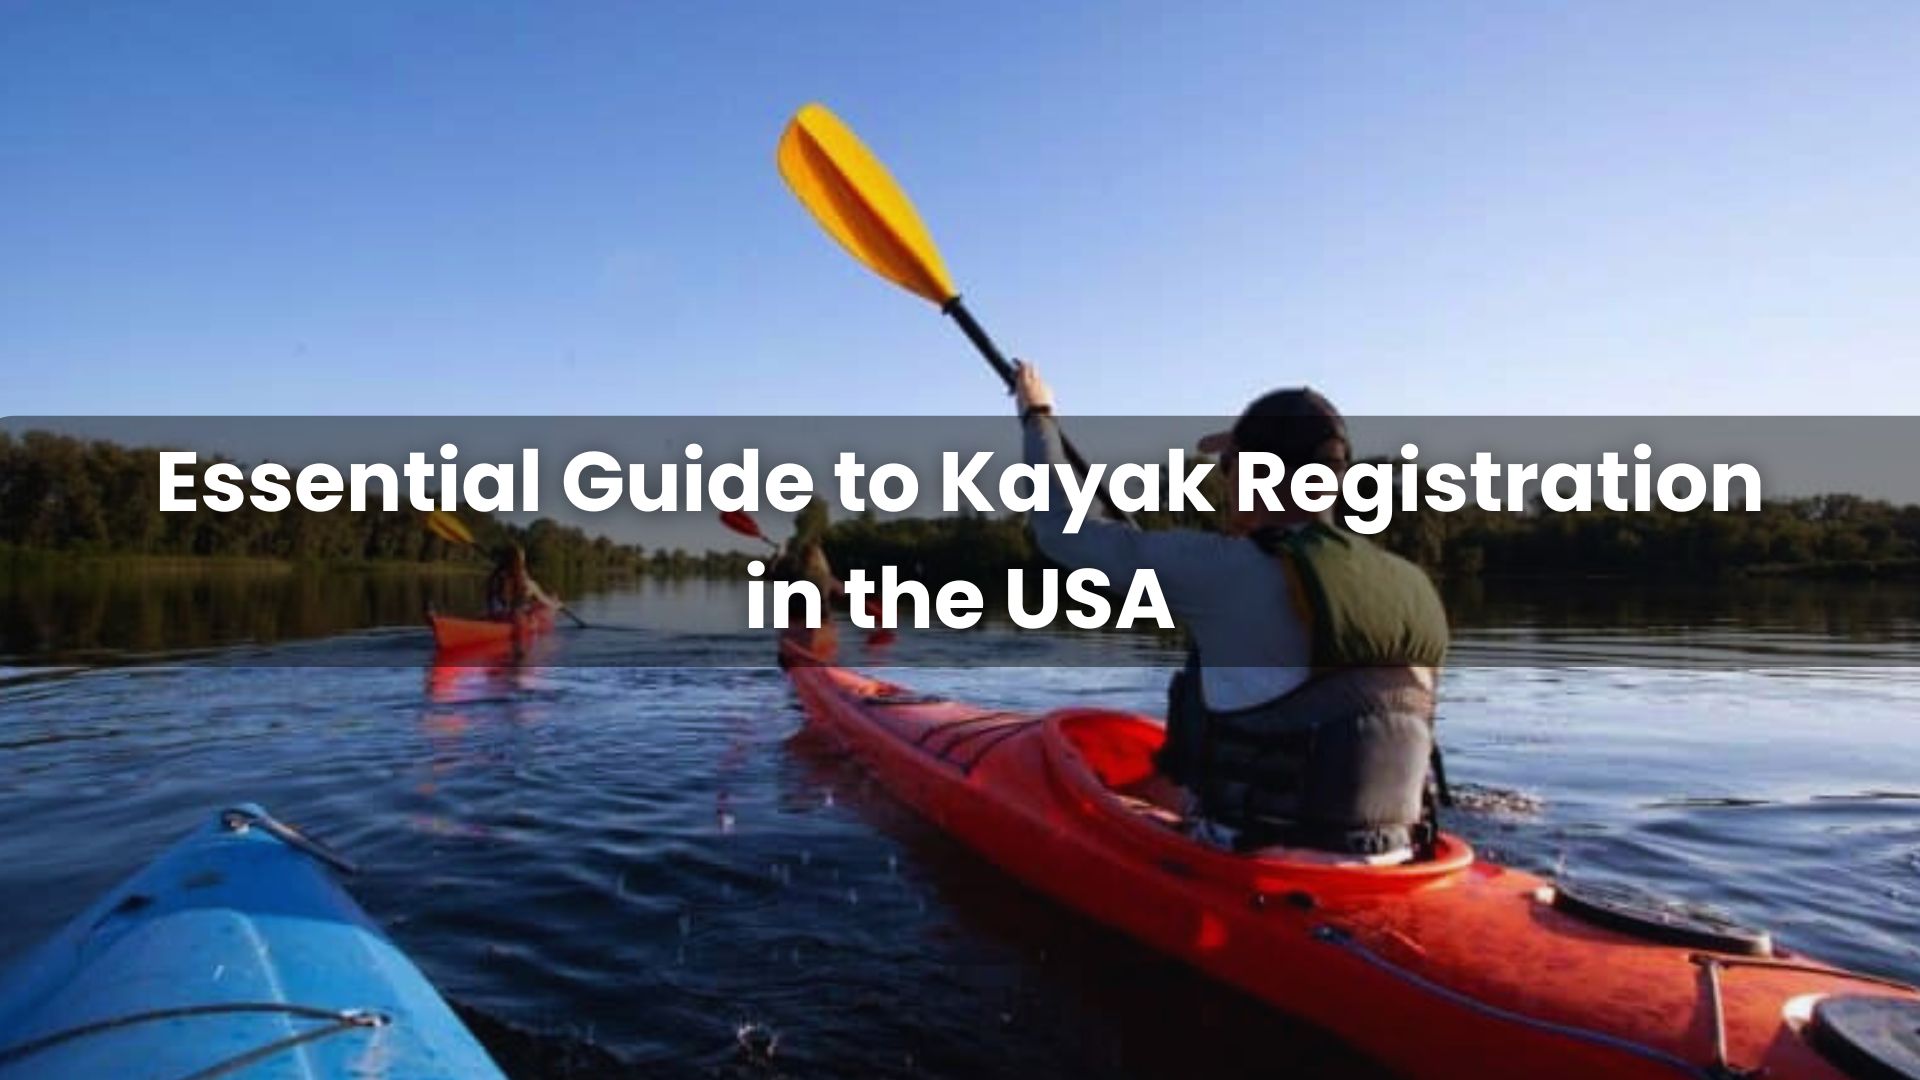 Kayak Registration in the USA